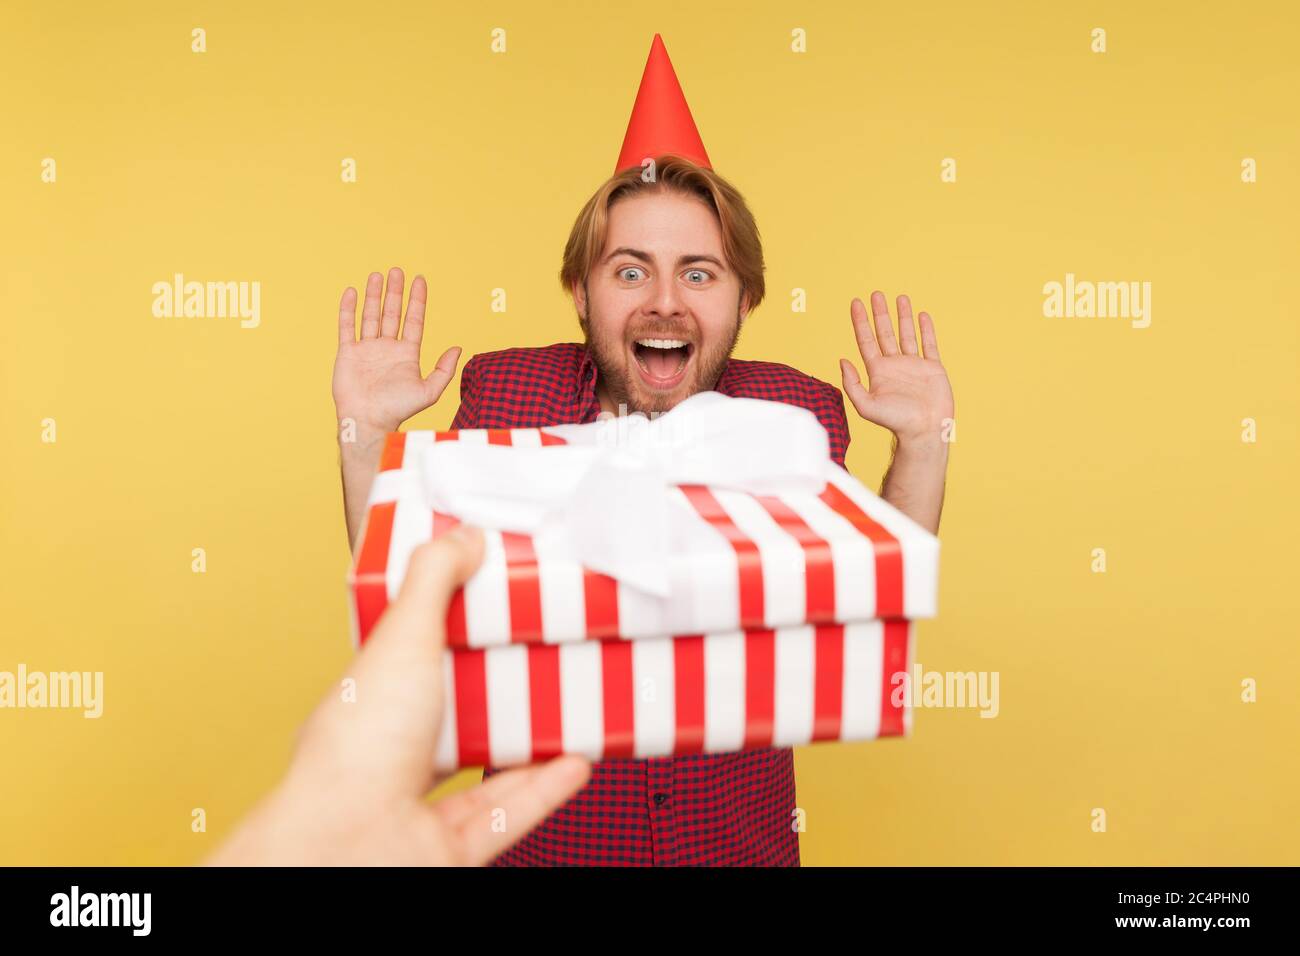 Pov Hand Giving Wrapped T Box To Guy With Party Cone On Head Excited Man Raising Hands